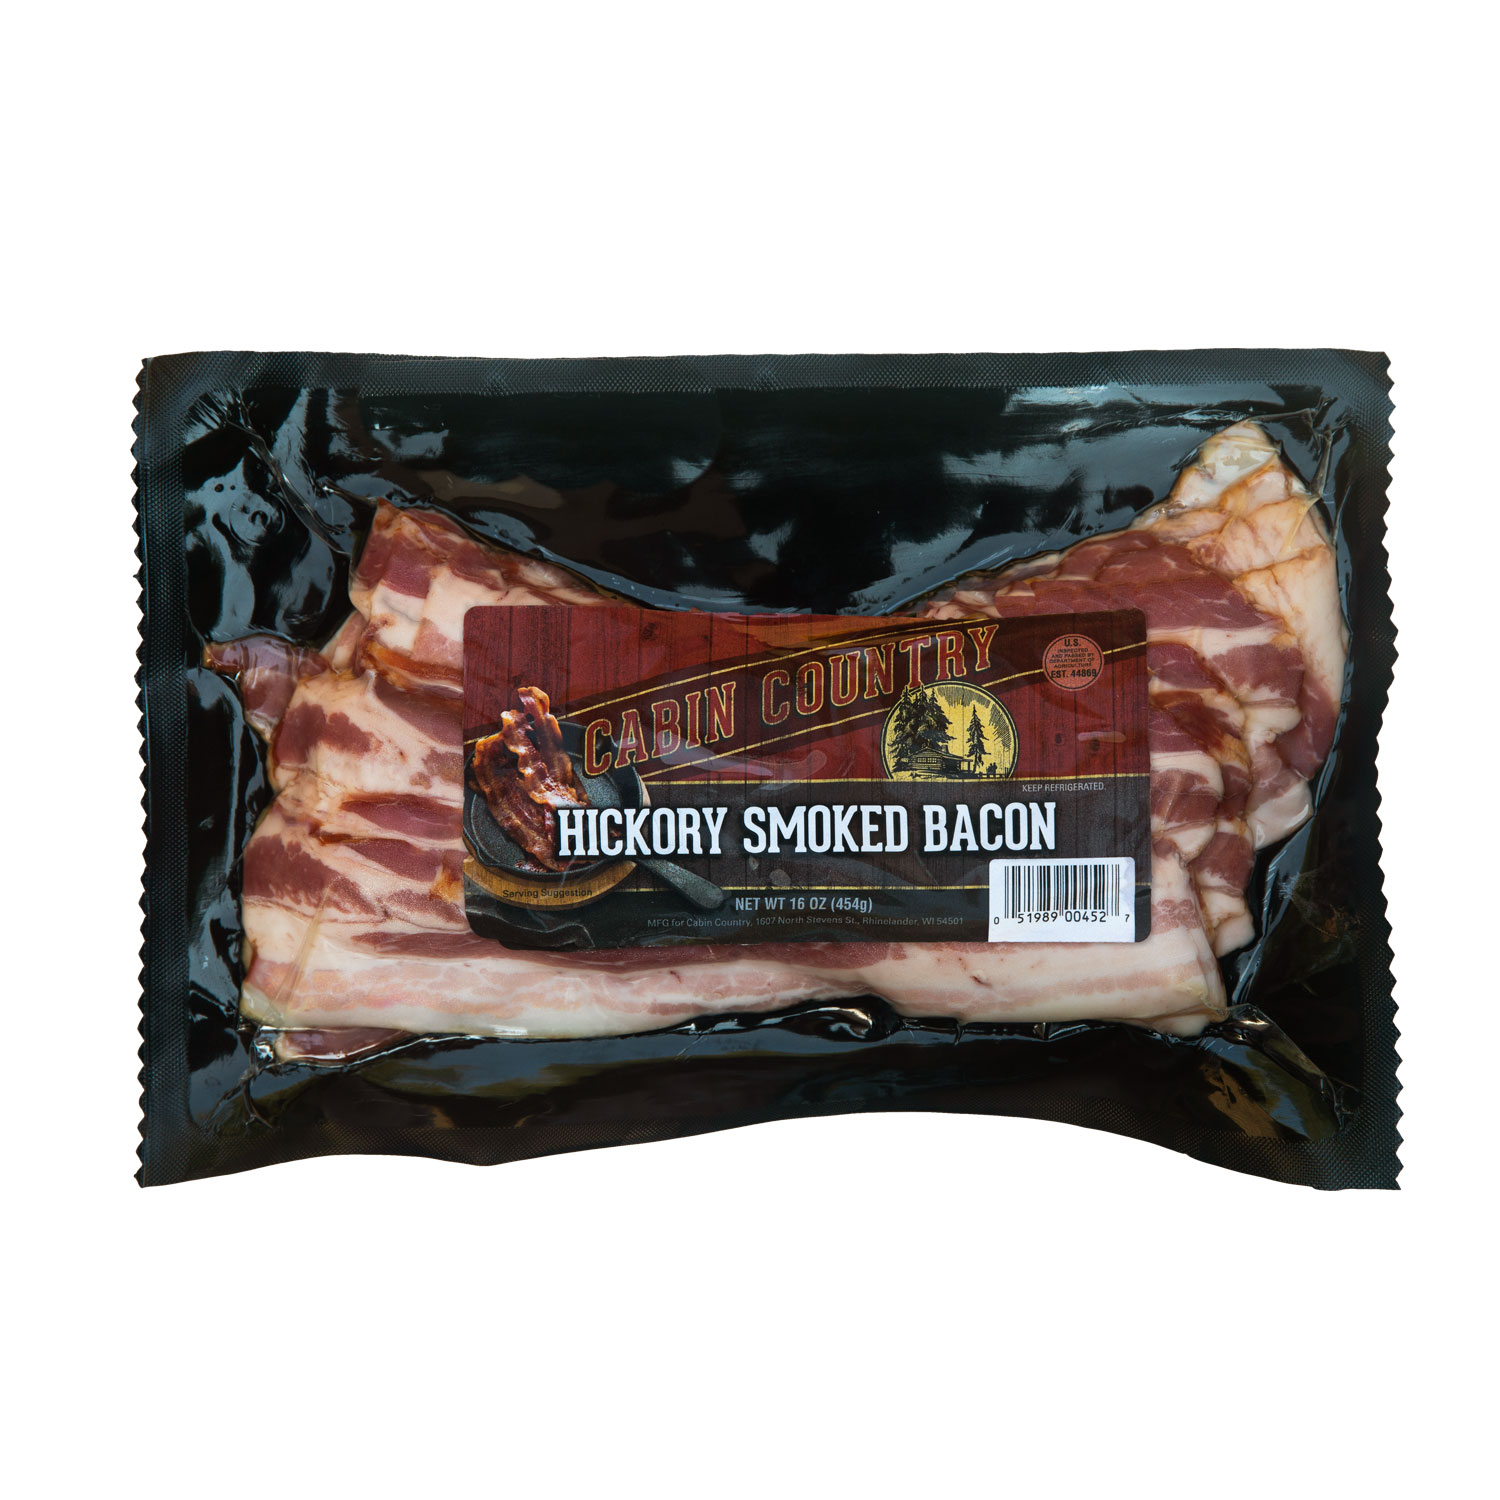 Sliced Hickory-Smoked Country Bacon